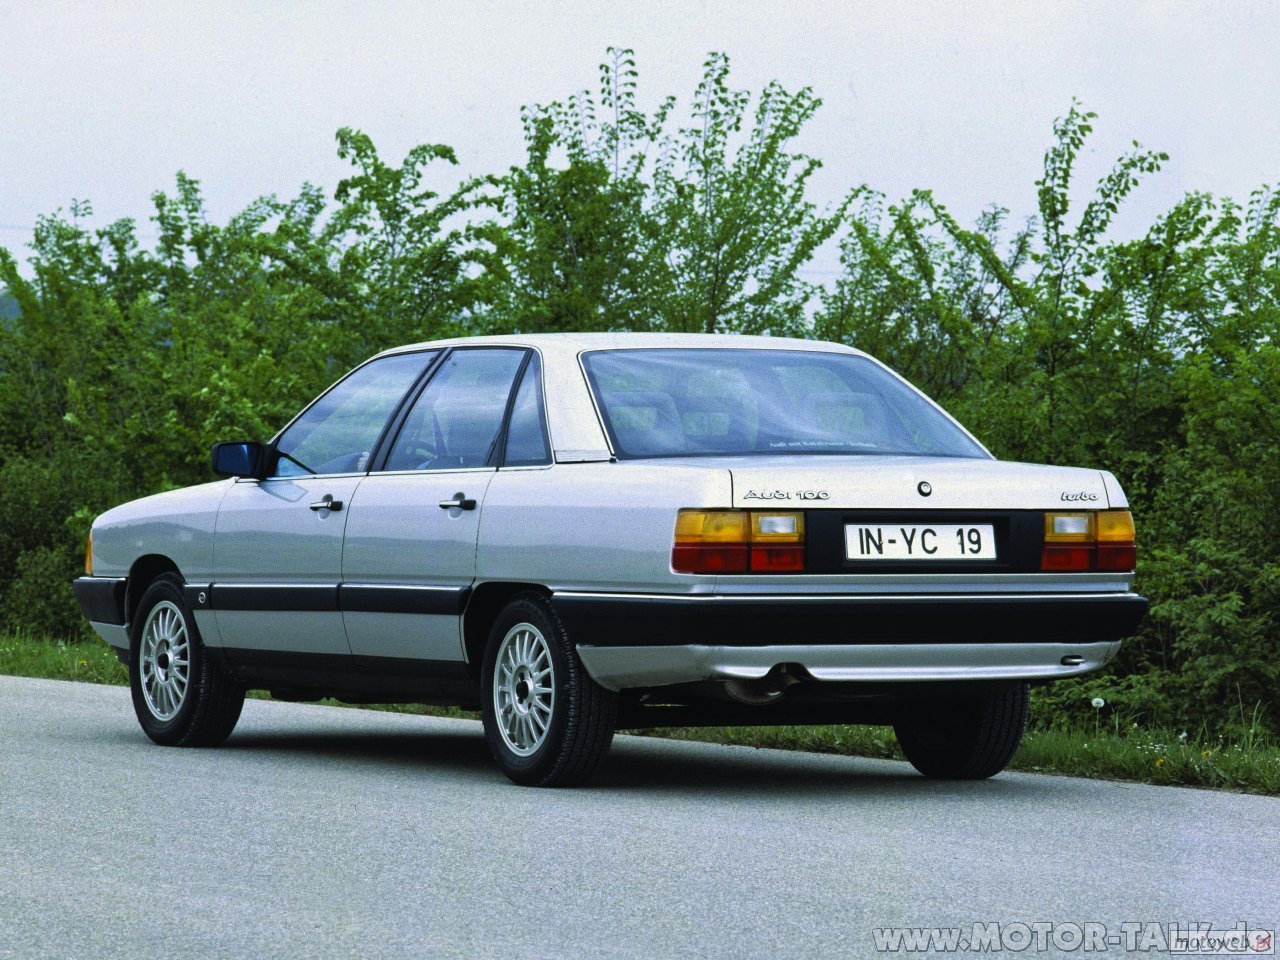 1985 Audi 100 1.9 related infomation,specifications ...